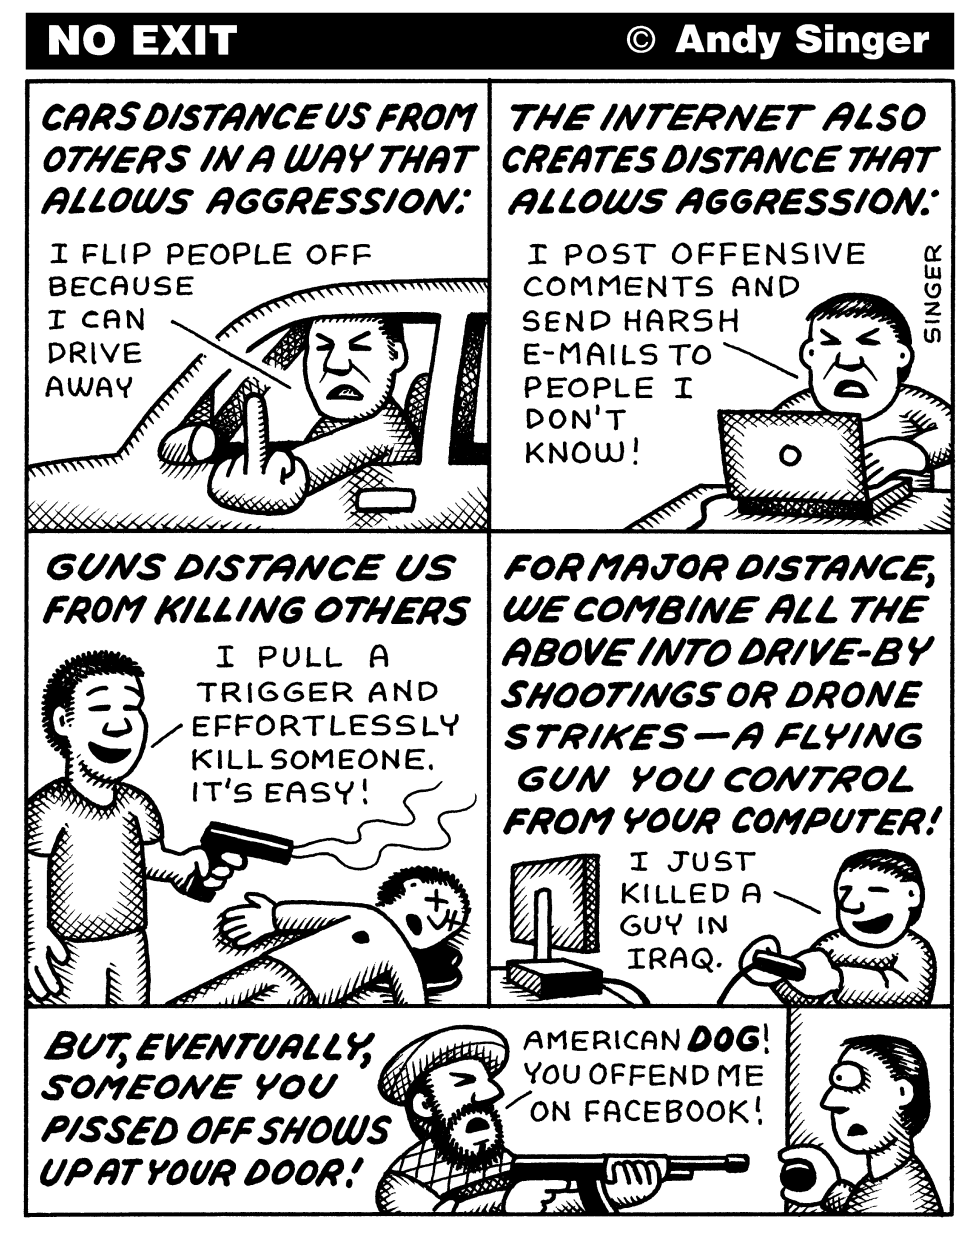 CARS INTERNET GUNS CREATE DISTANCE by Andy Singer